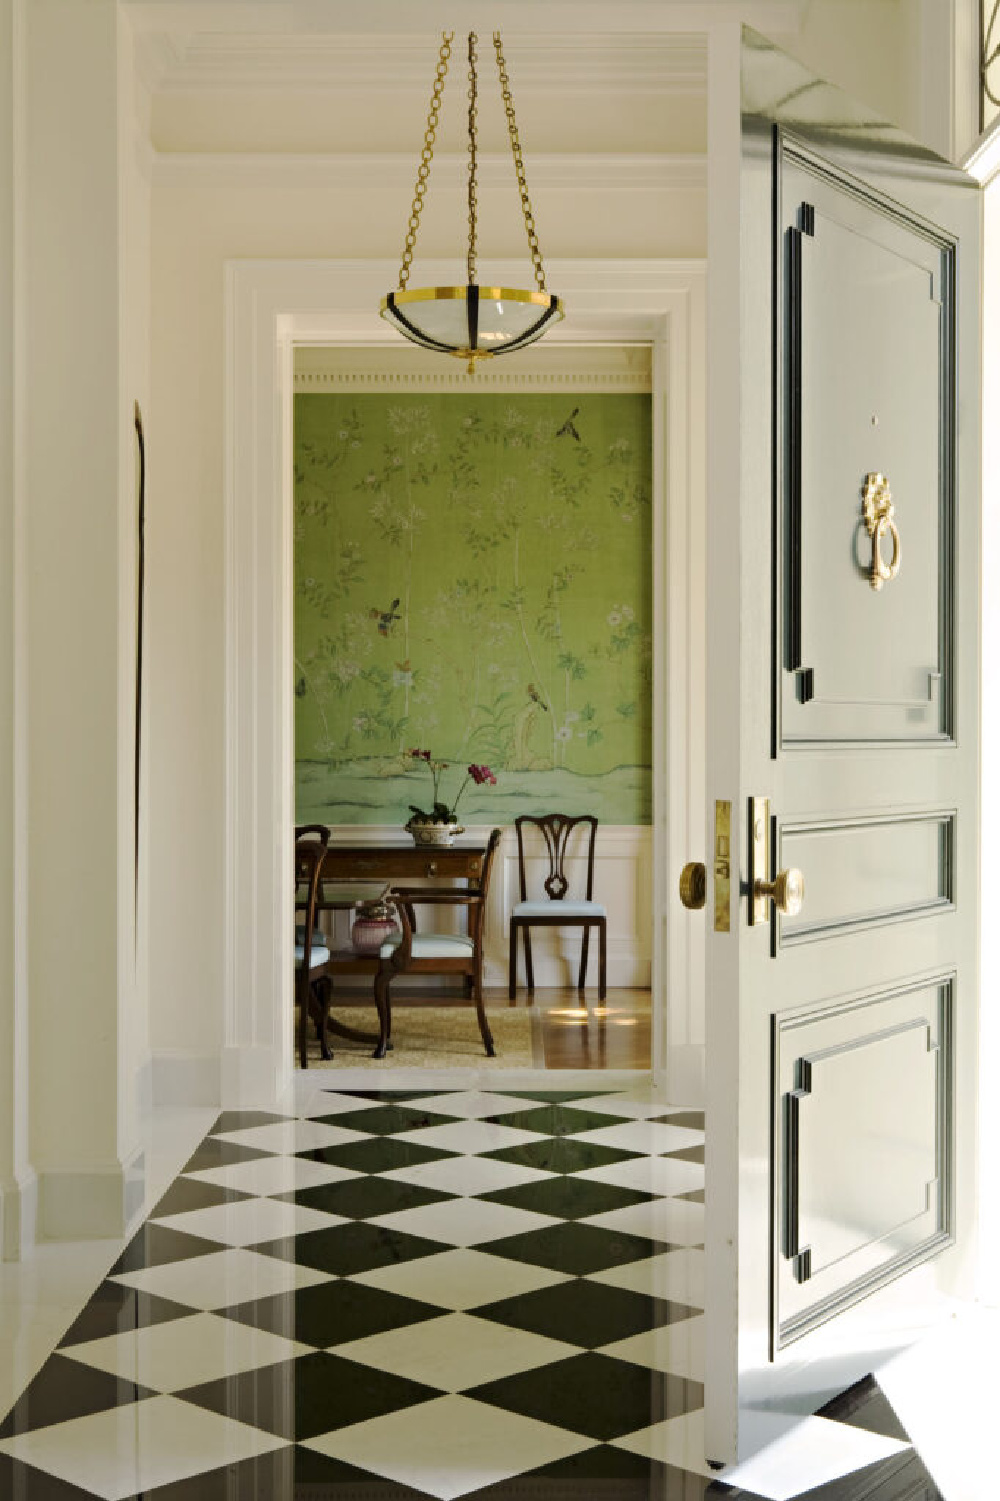 Green deGournay wallpaper in a Thomas Proctor Hollywood home with checkered floor in the entry -  interior design by Elizabeth Dinkel. #greeninterior #degournaywallpaper #entry